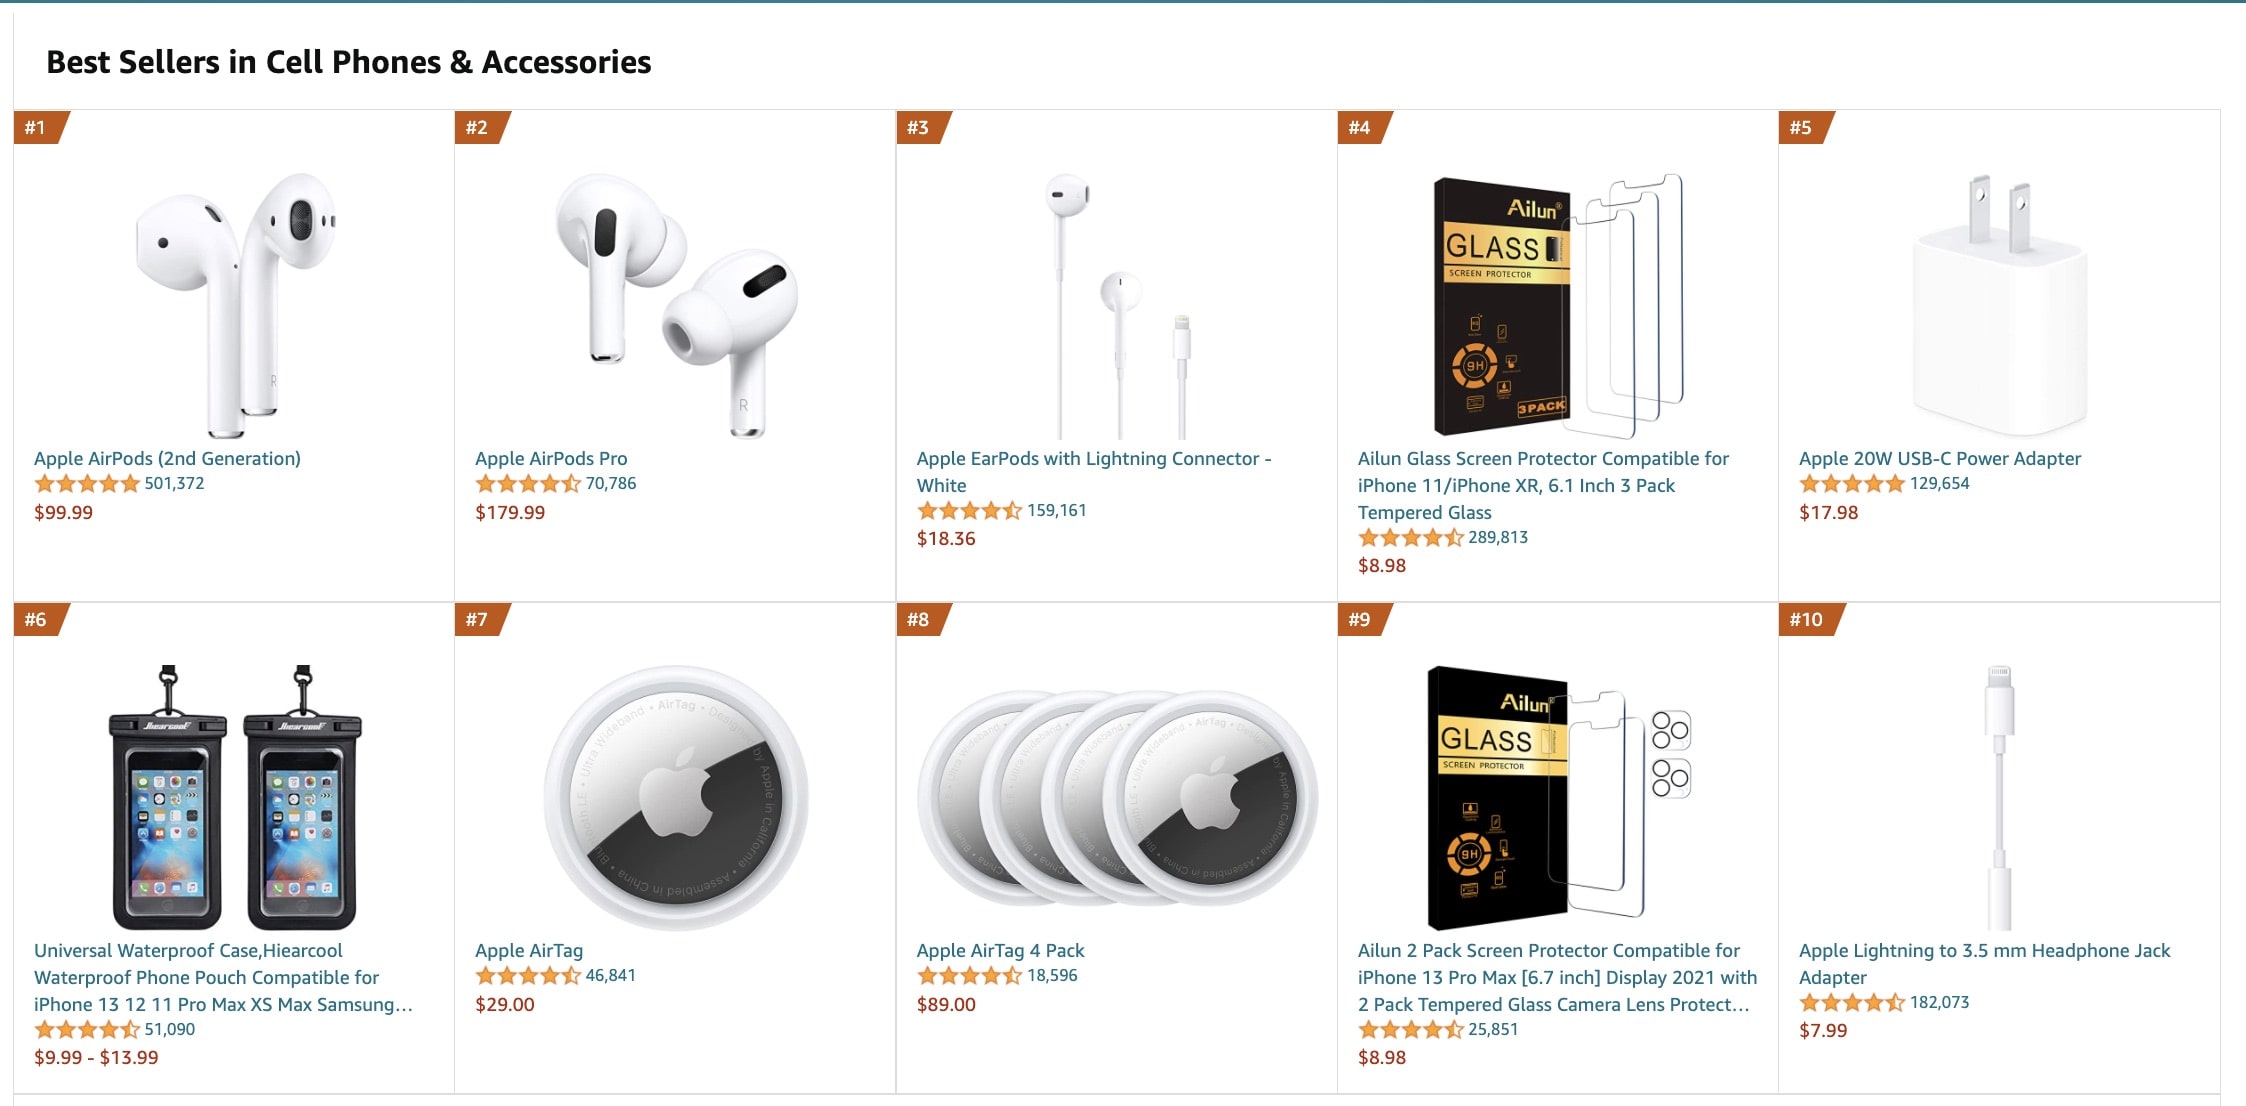 a picture showing the best phone accessories to make a fortune on amazon with